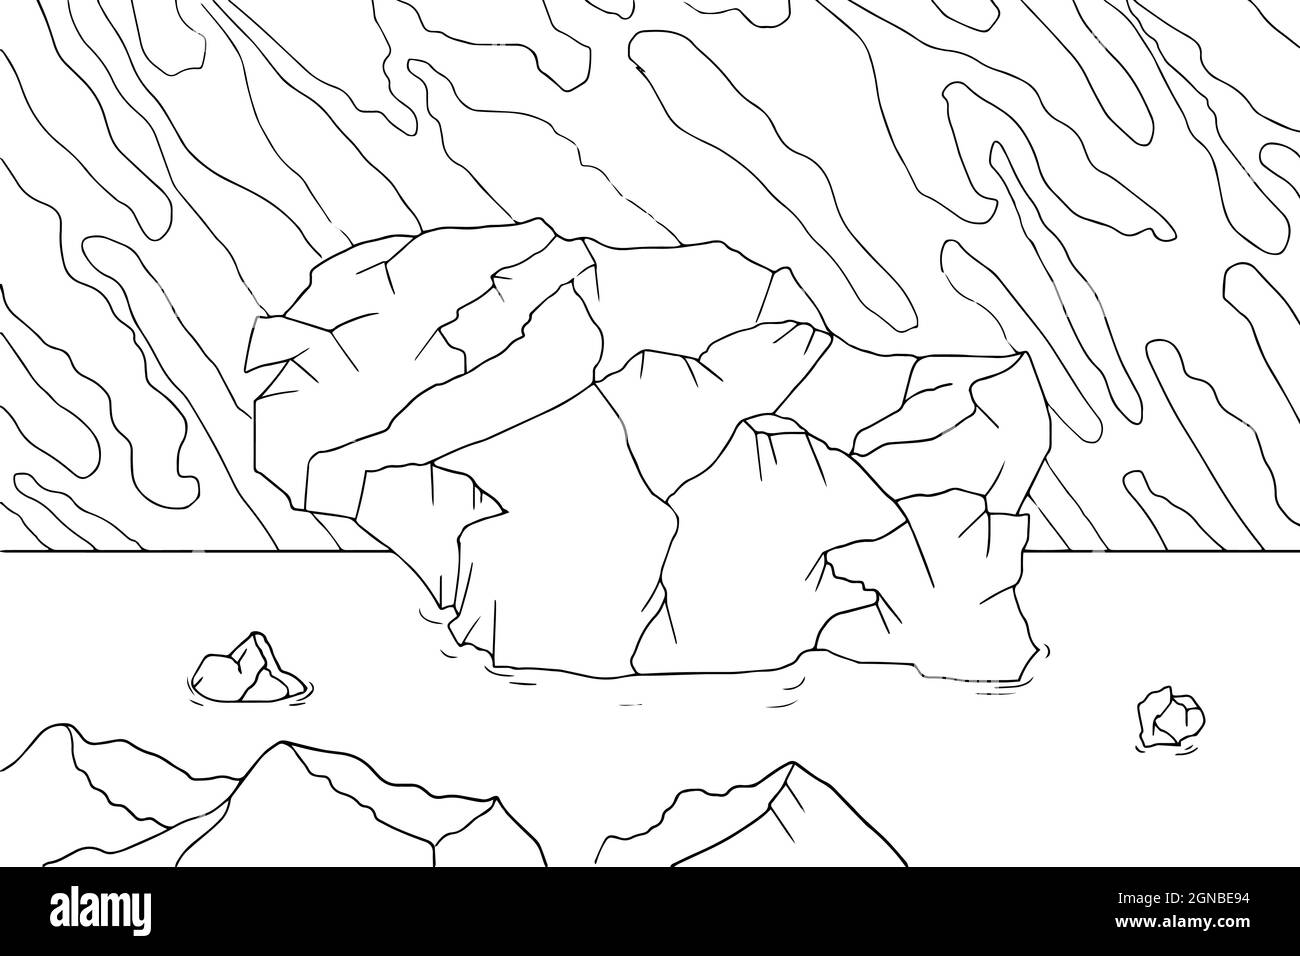 Doodle alien fantasy landscape with big rocks coloring page for adults. Fantastic psychedelic graphic artwork. Vector hand drawn simple flat illustrat Stock Vector